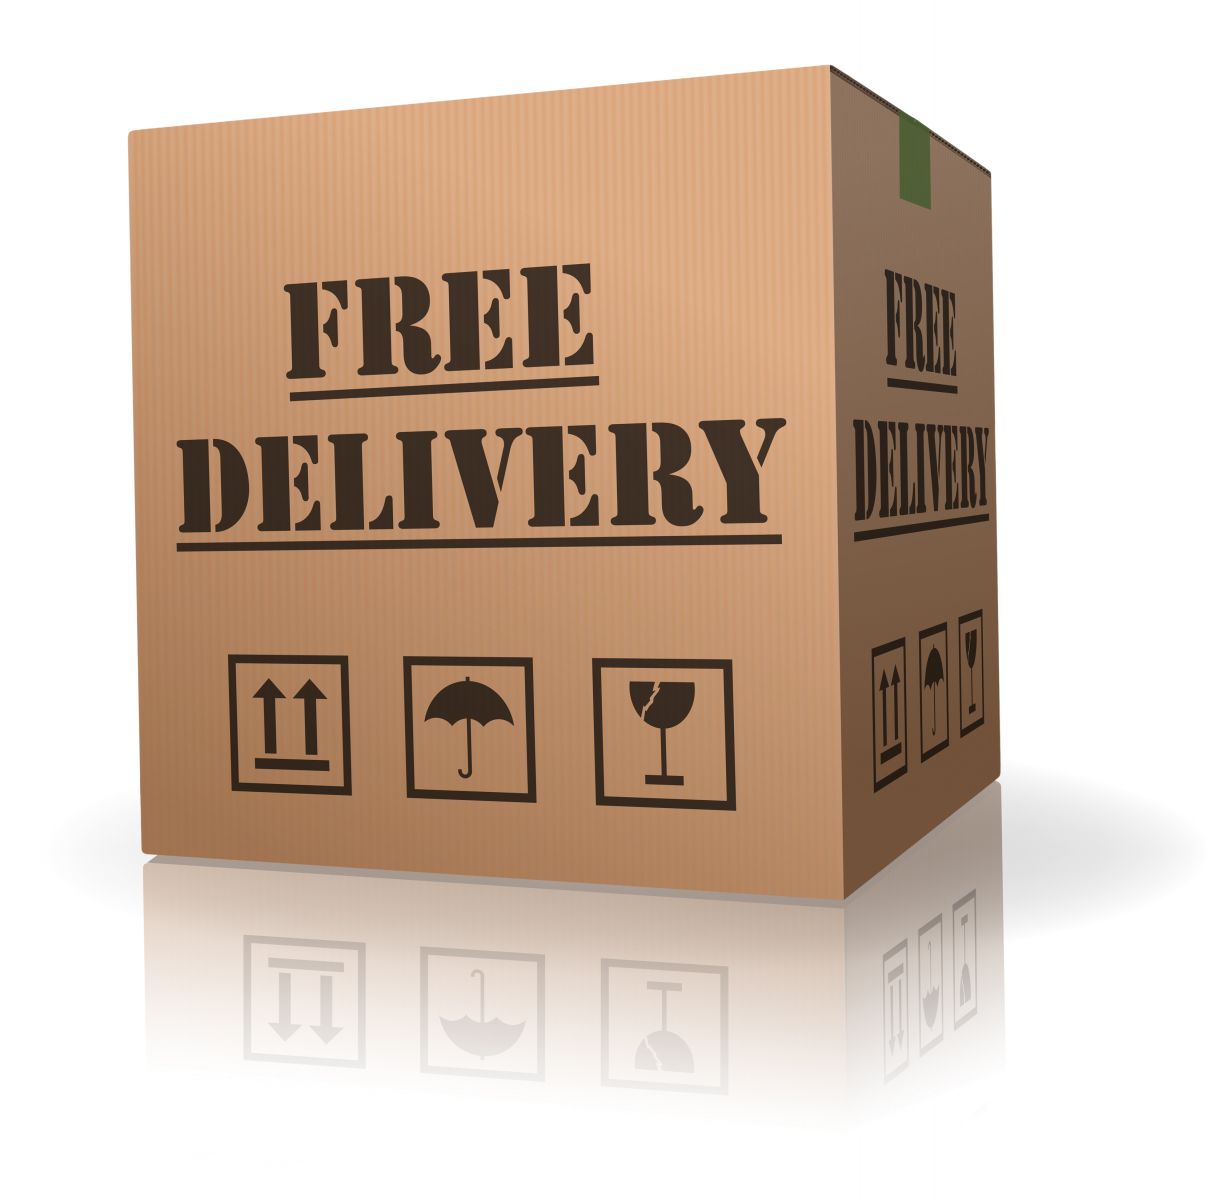 fREE dELIVERY